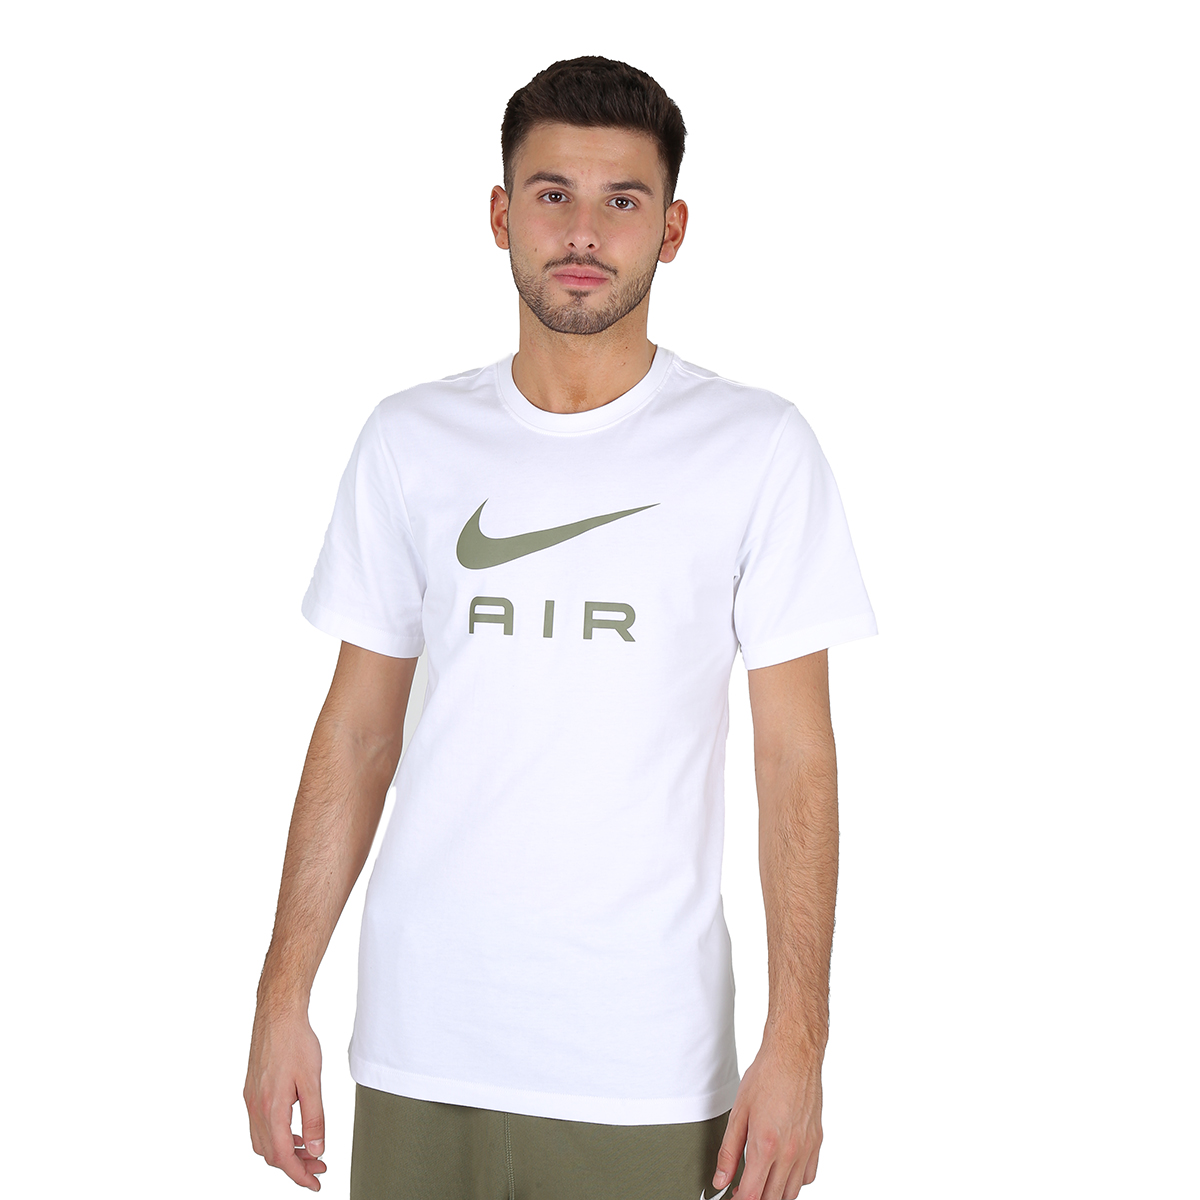 Remera Nike Sportswear Air Hombre,  image number null